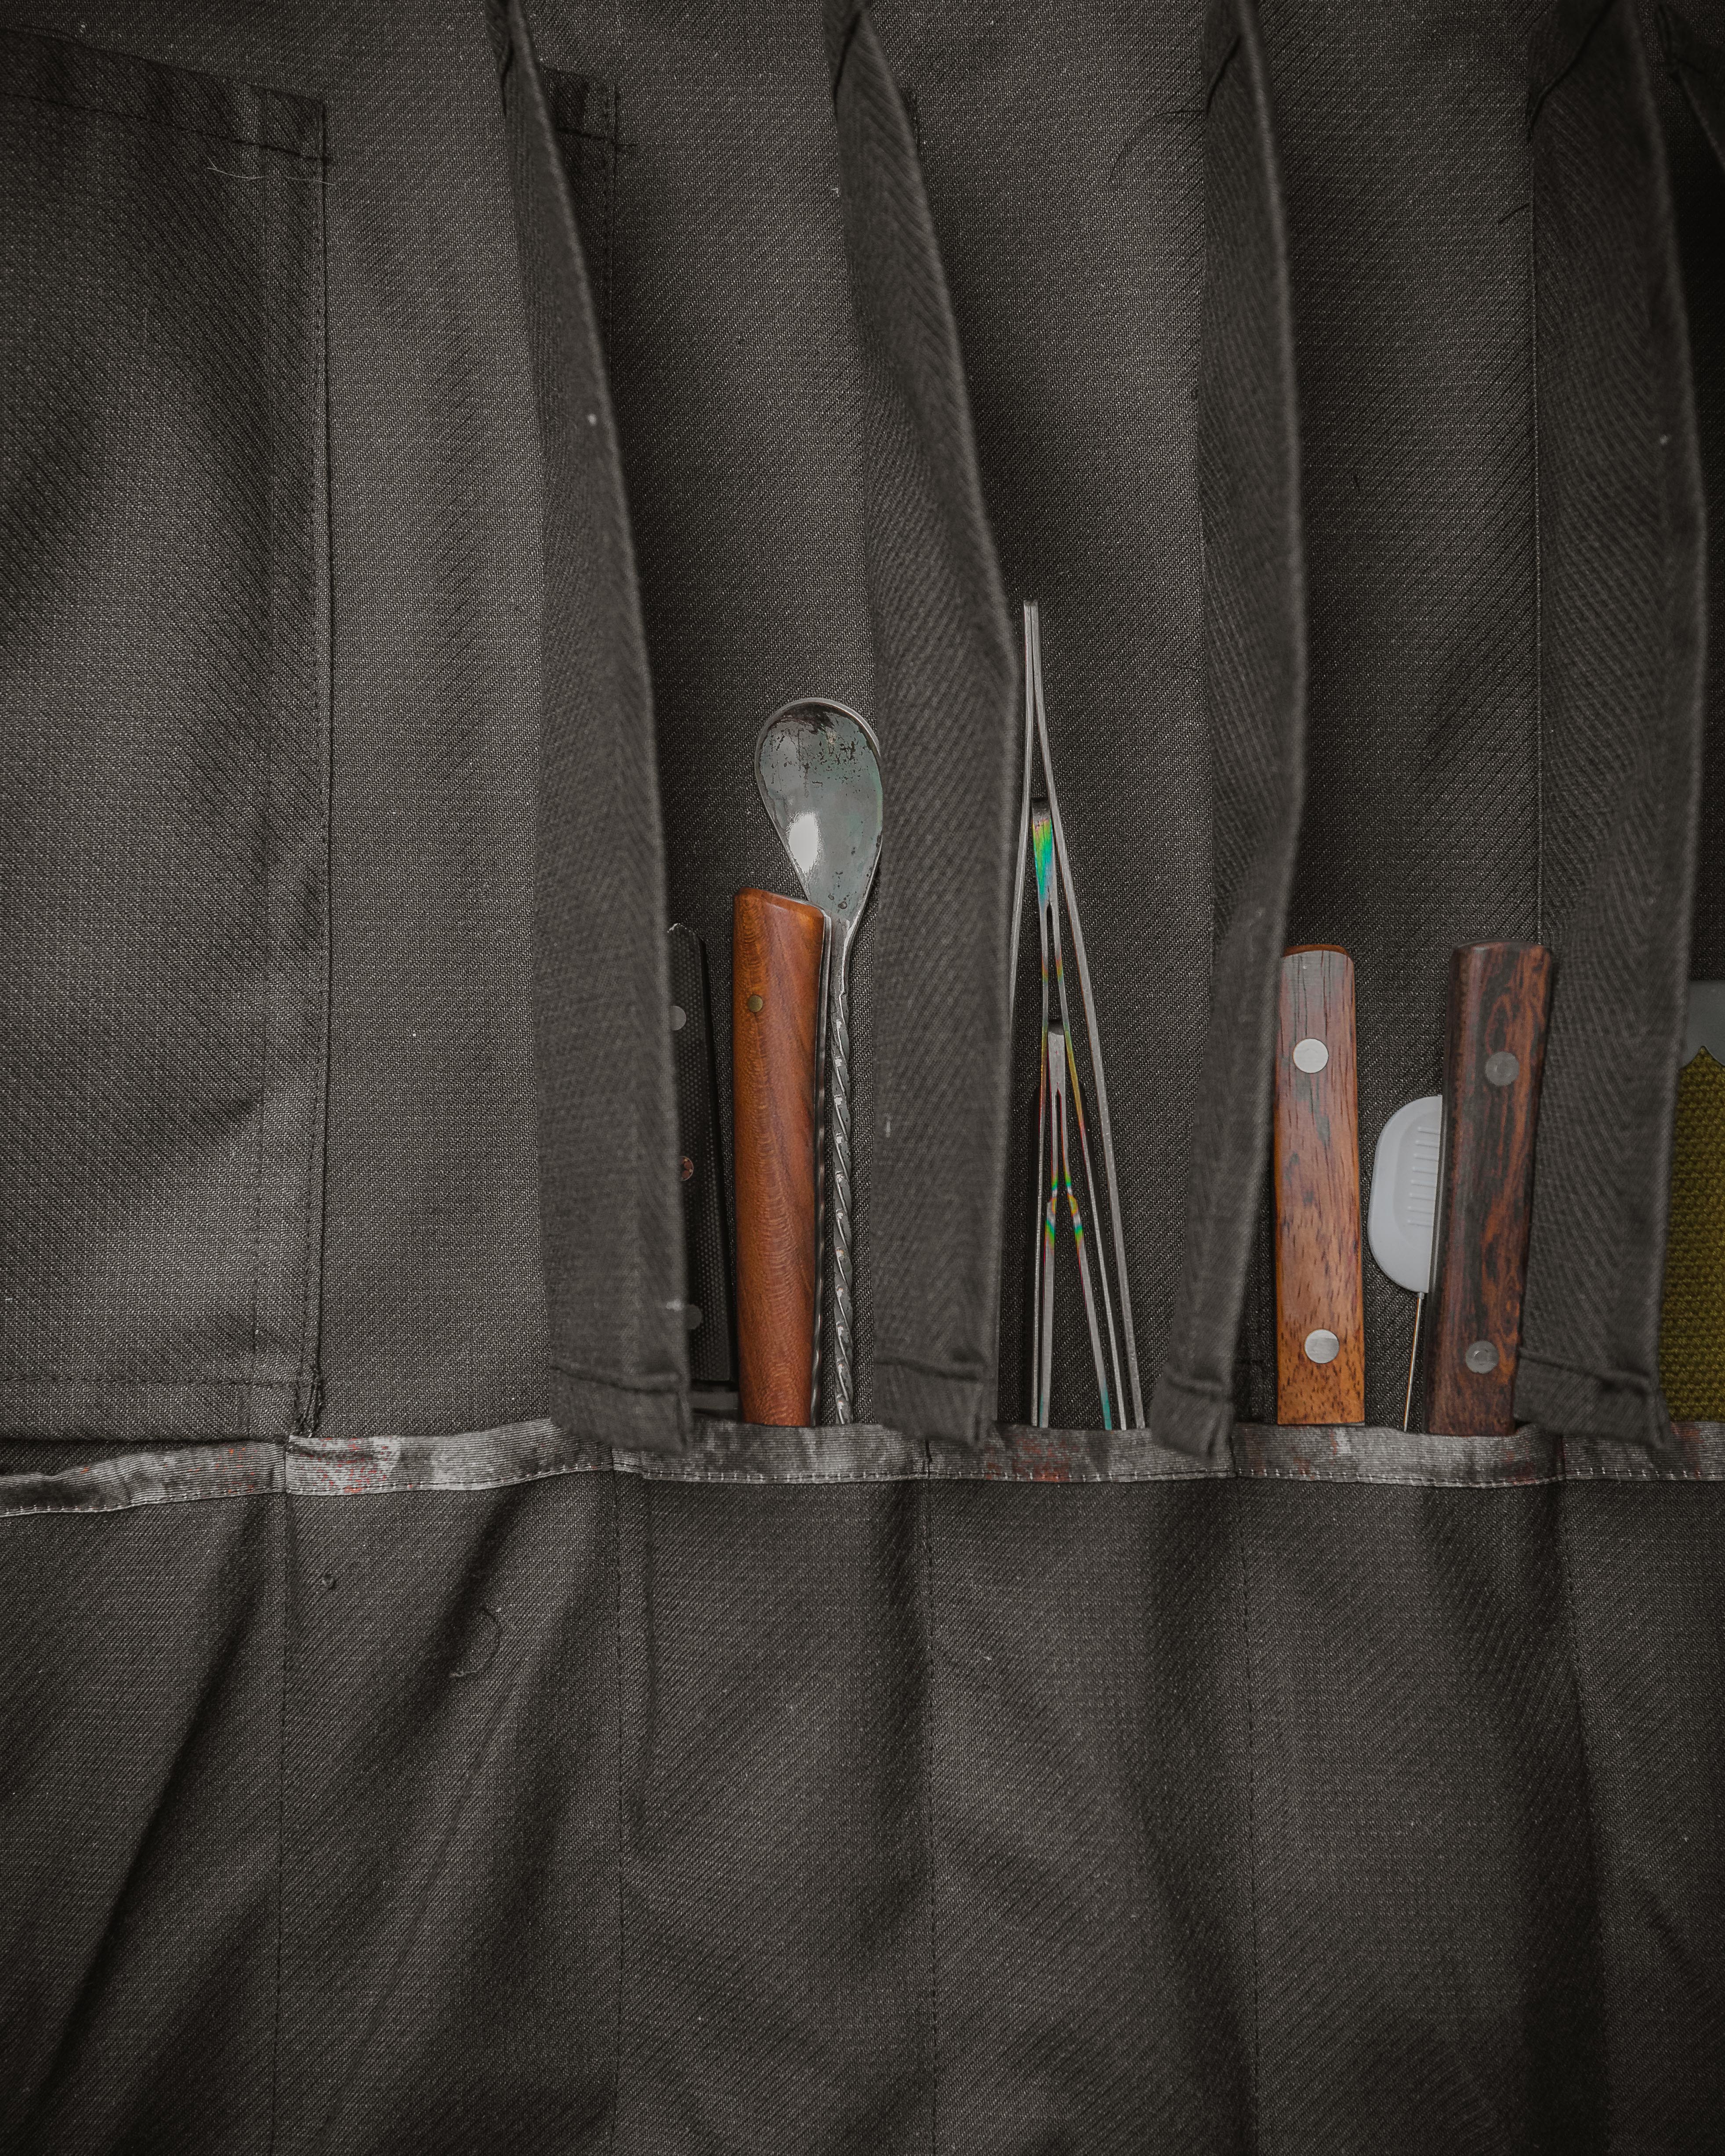 Product shot of a Side Hustle knife roll with utensils shown in the interior pockets. This knife roll was produced by Craftmade Aprons in Minnesota. 